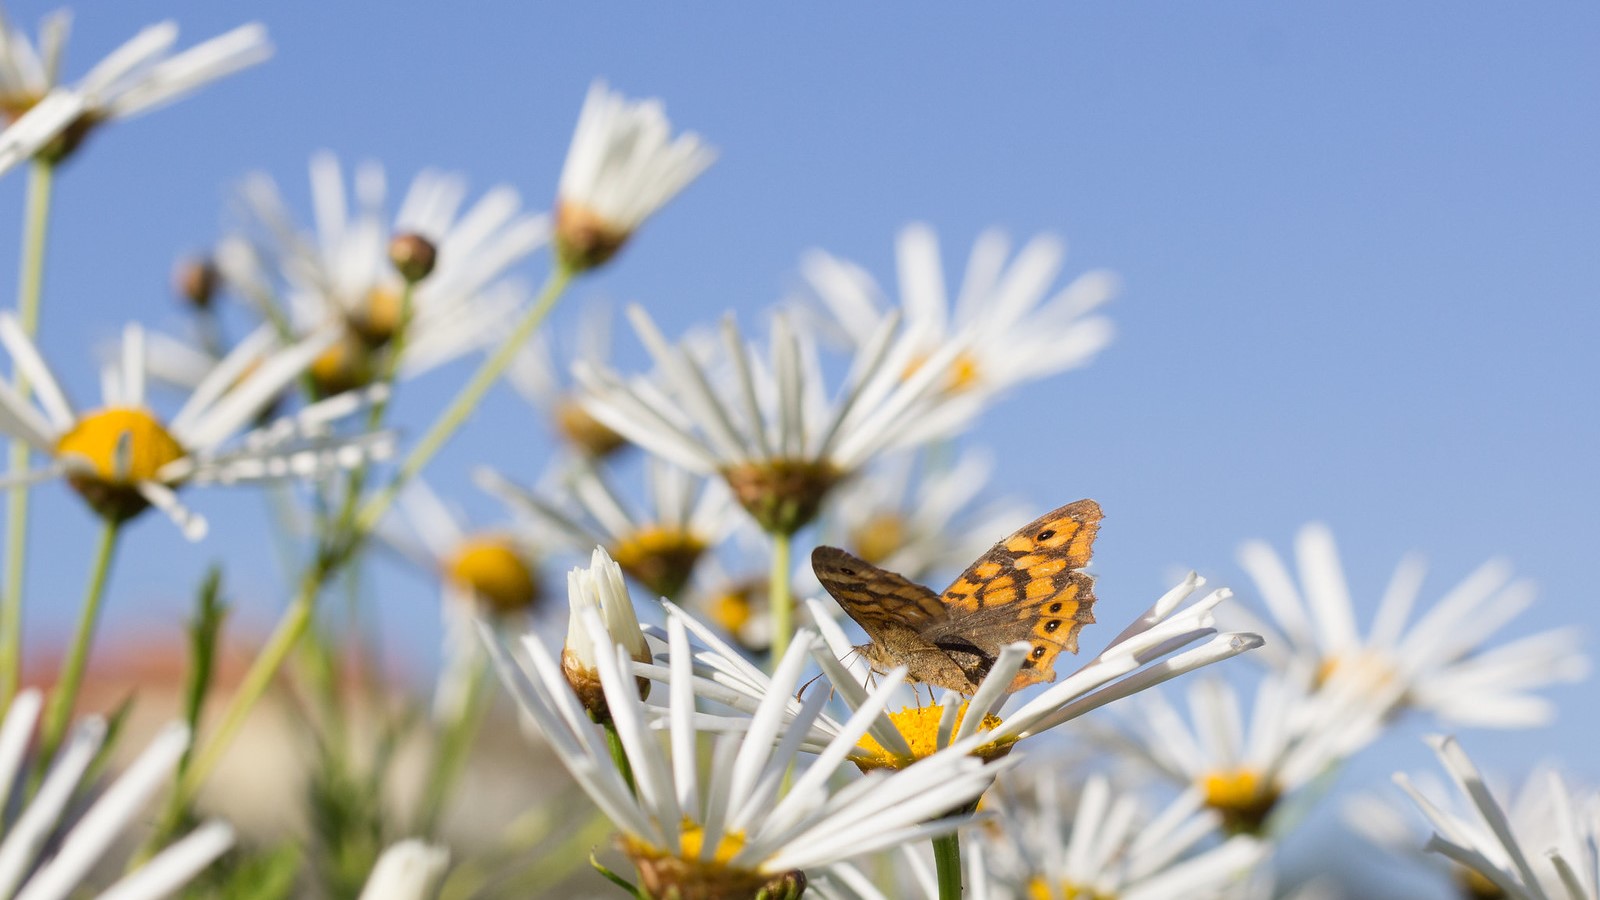 A photo of a monarch butterfly in a field of daisies